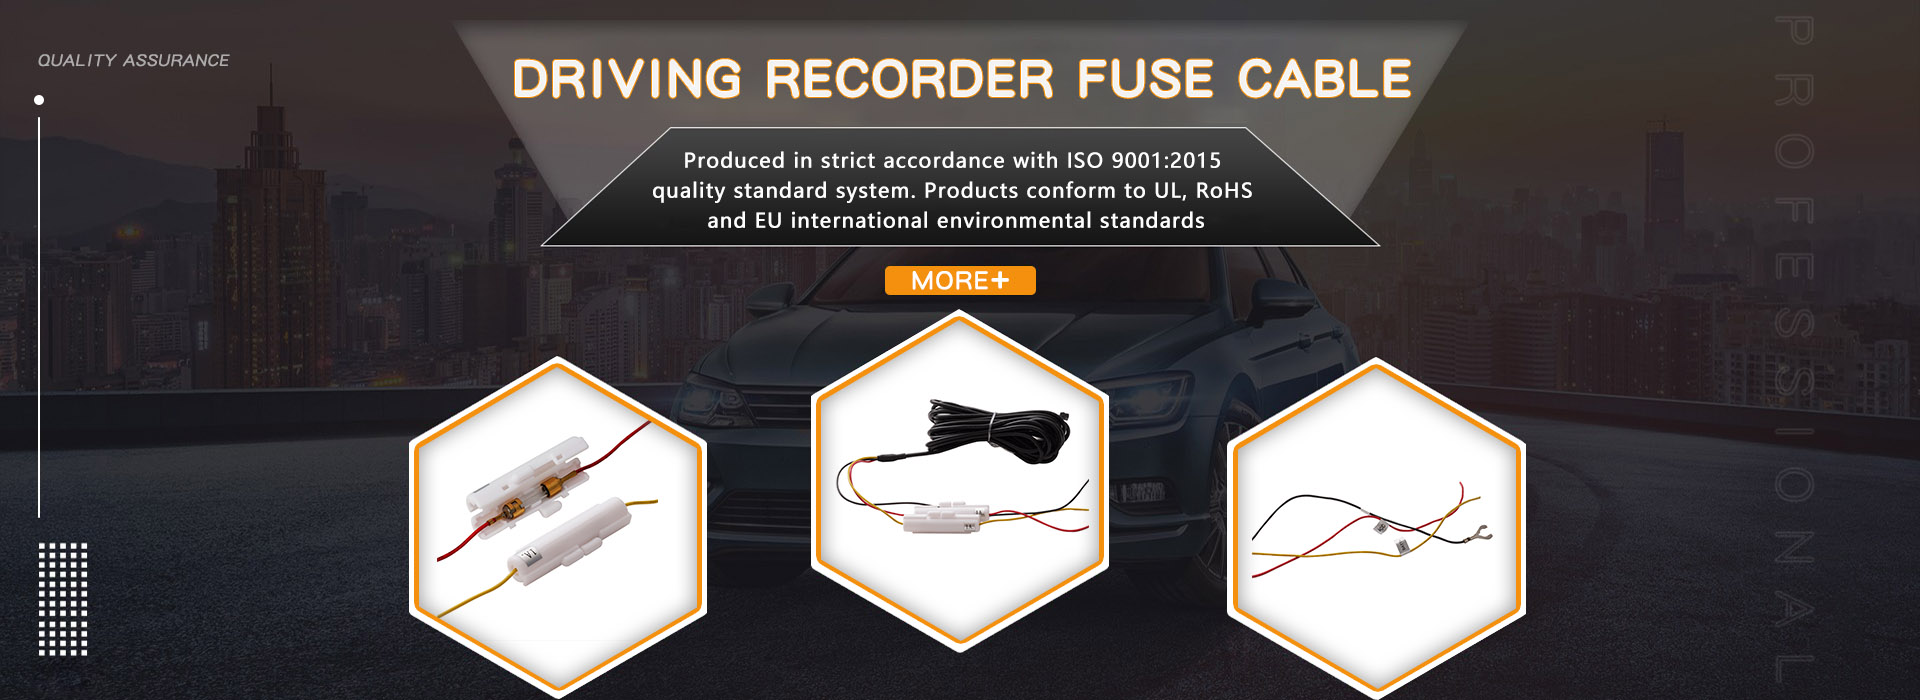 Driving recorder fuse cable